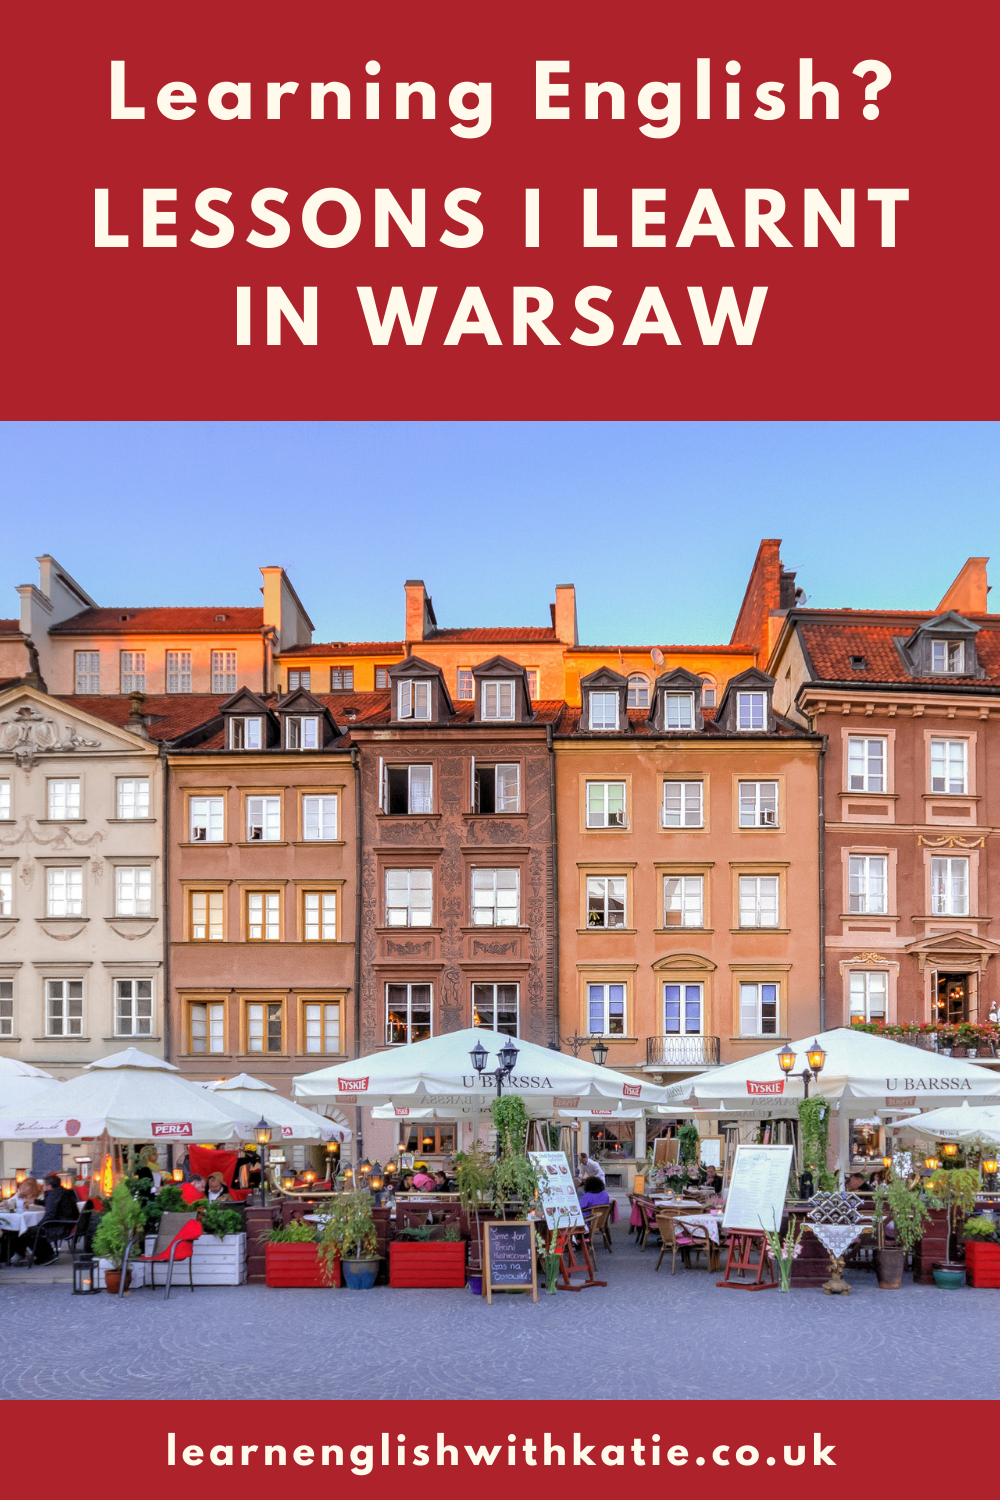 Pinterest pin showing image of the old town in Warsaw